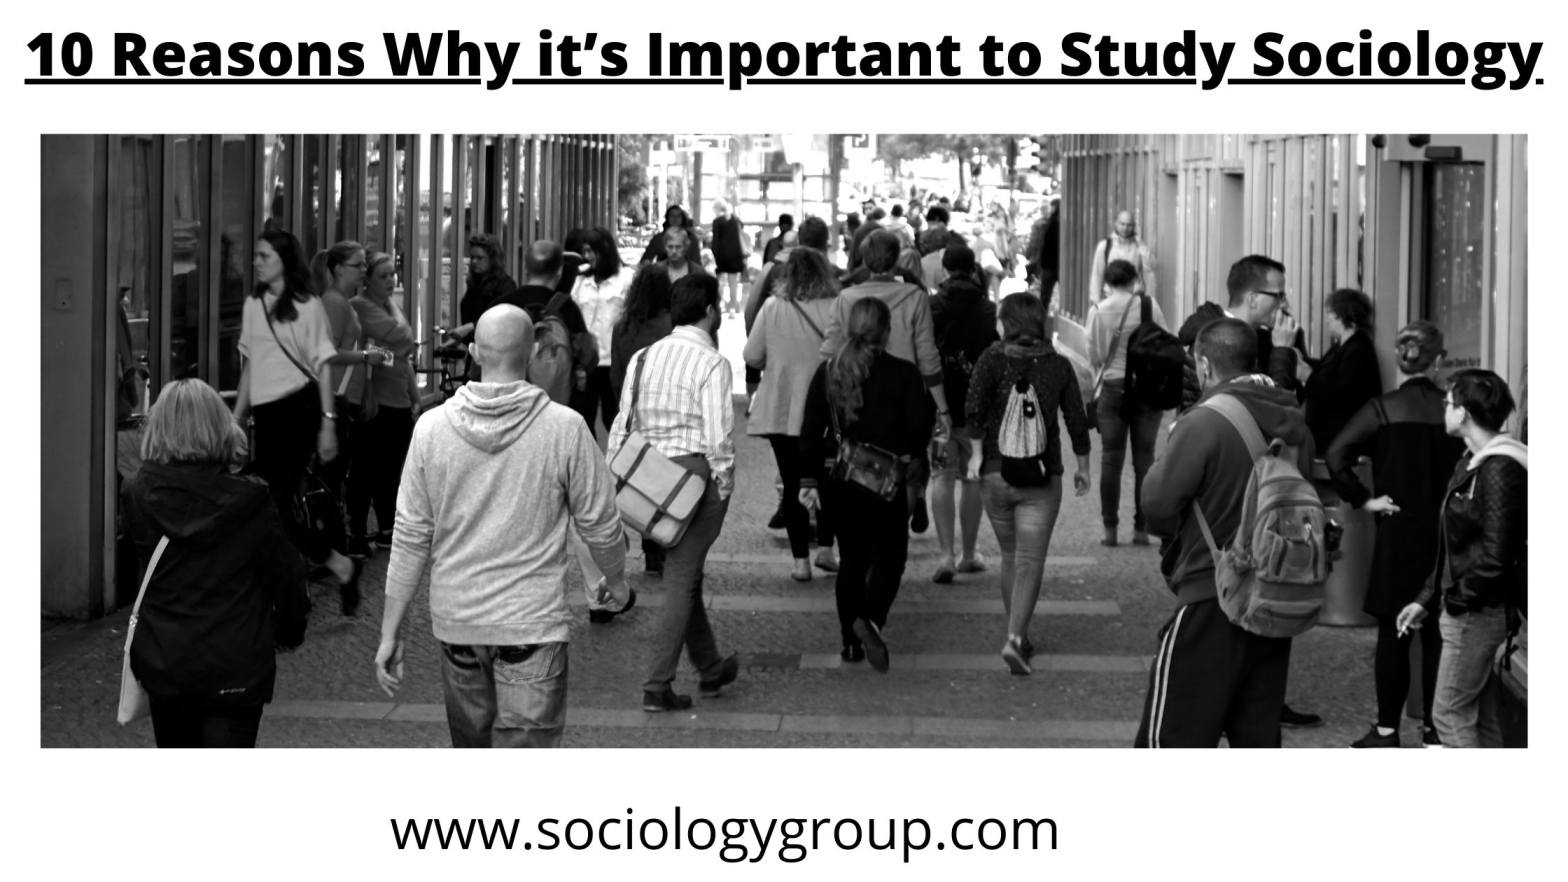 why is it important to study sociology explained reasons